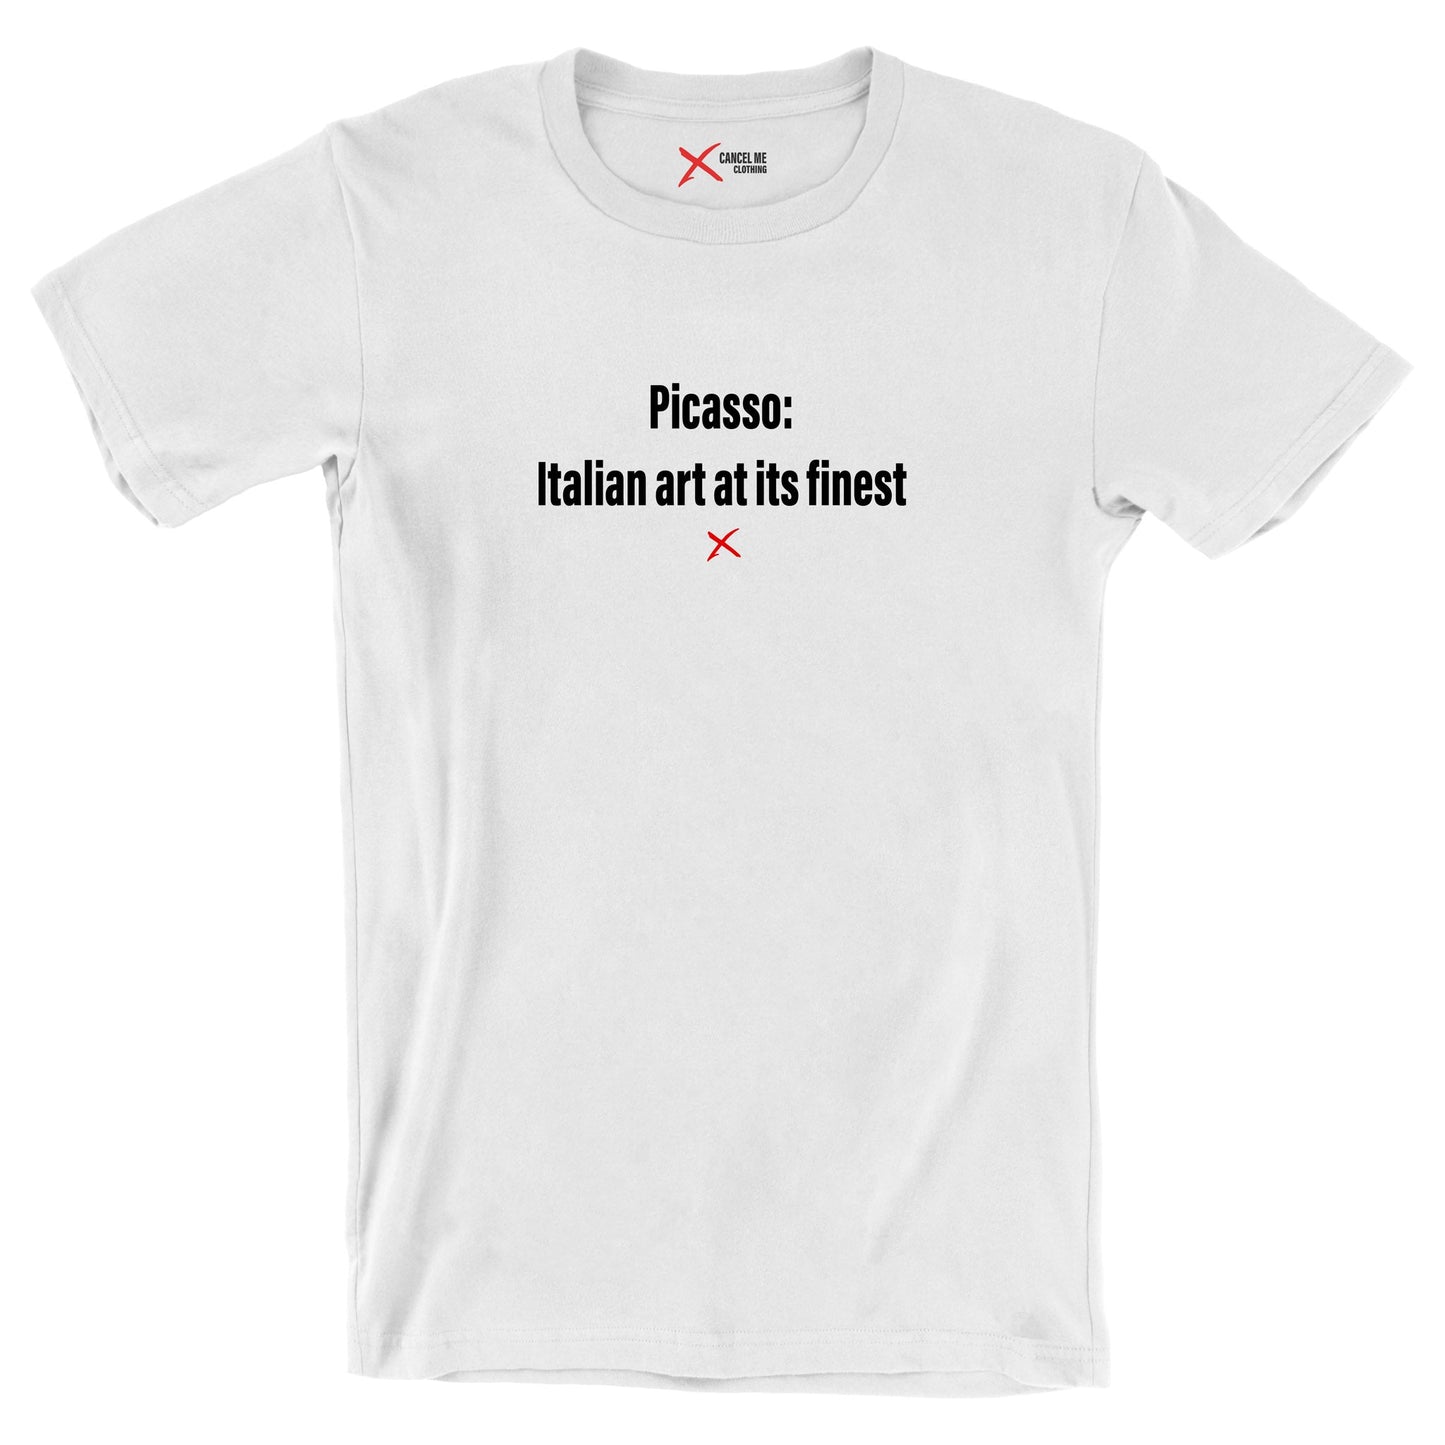 Picasso: Italian art at its finest - Shirt